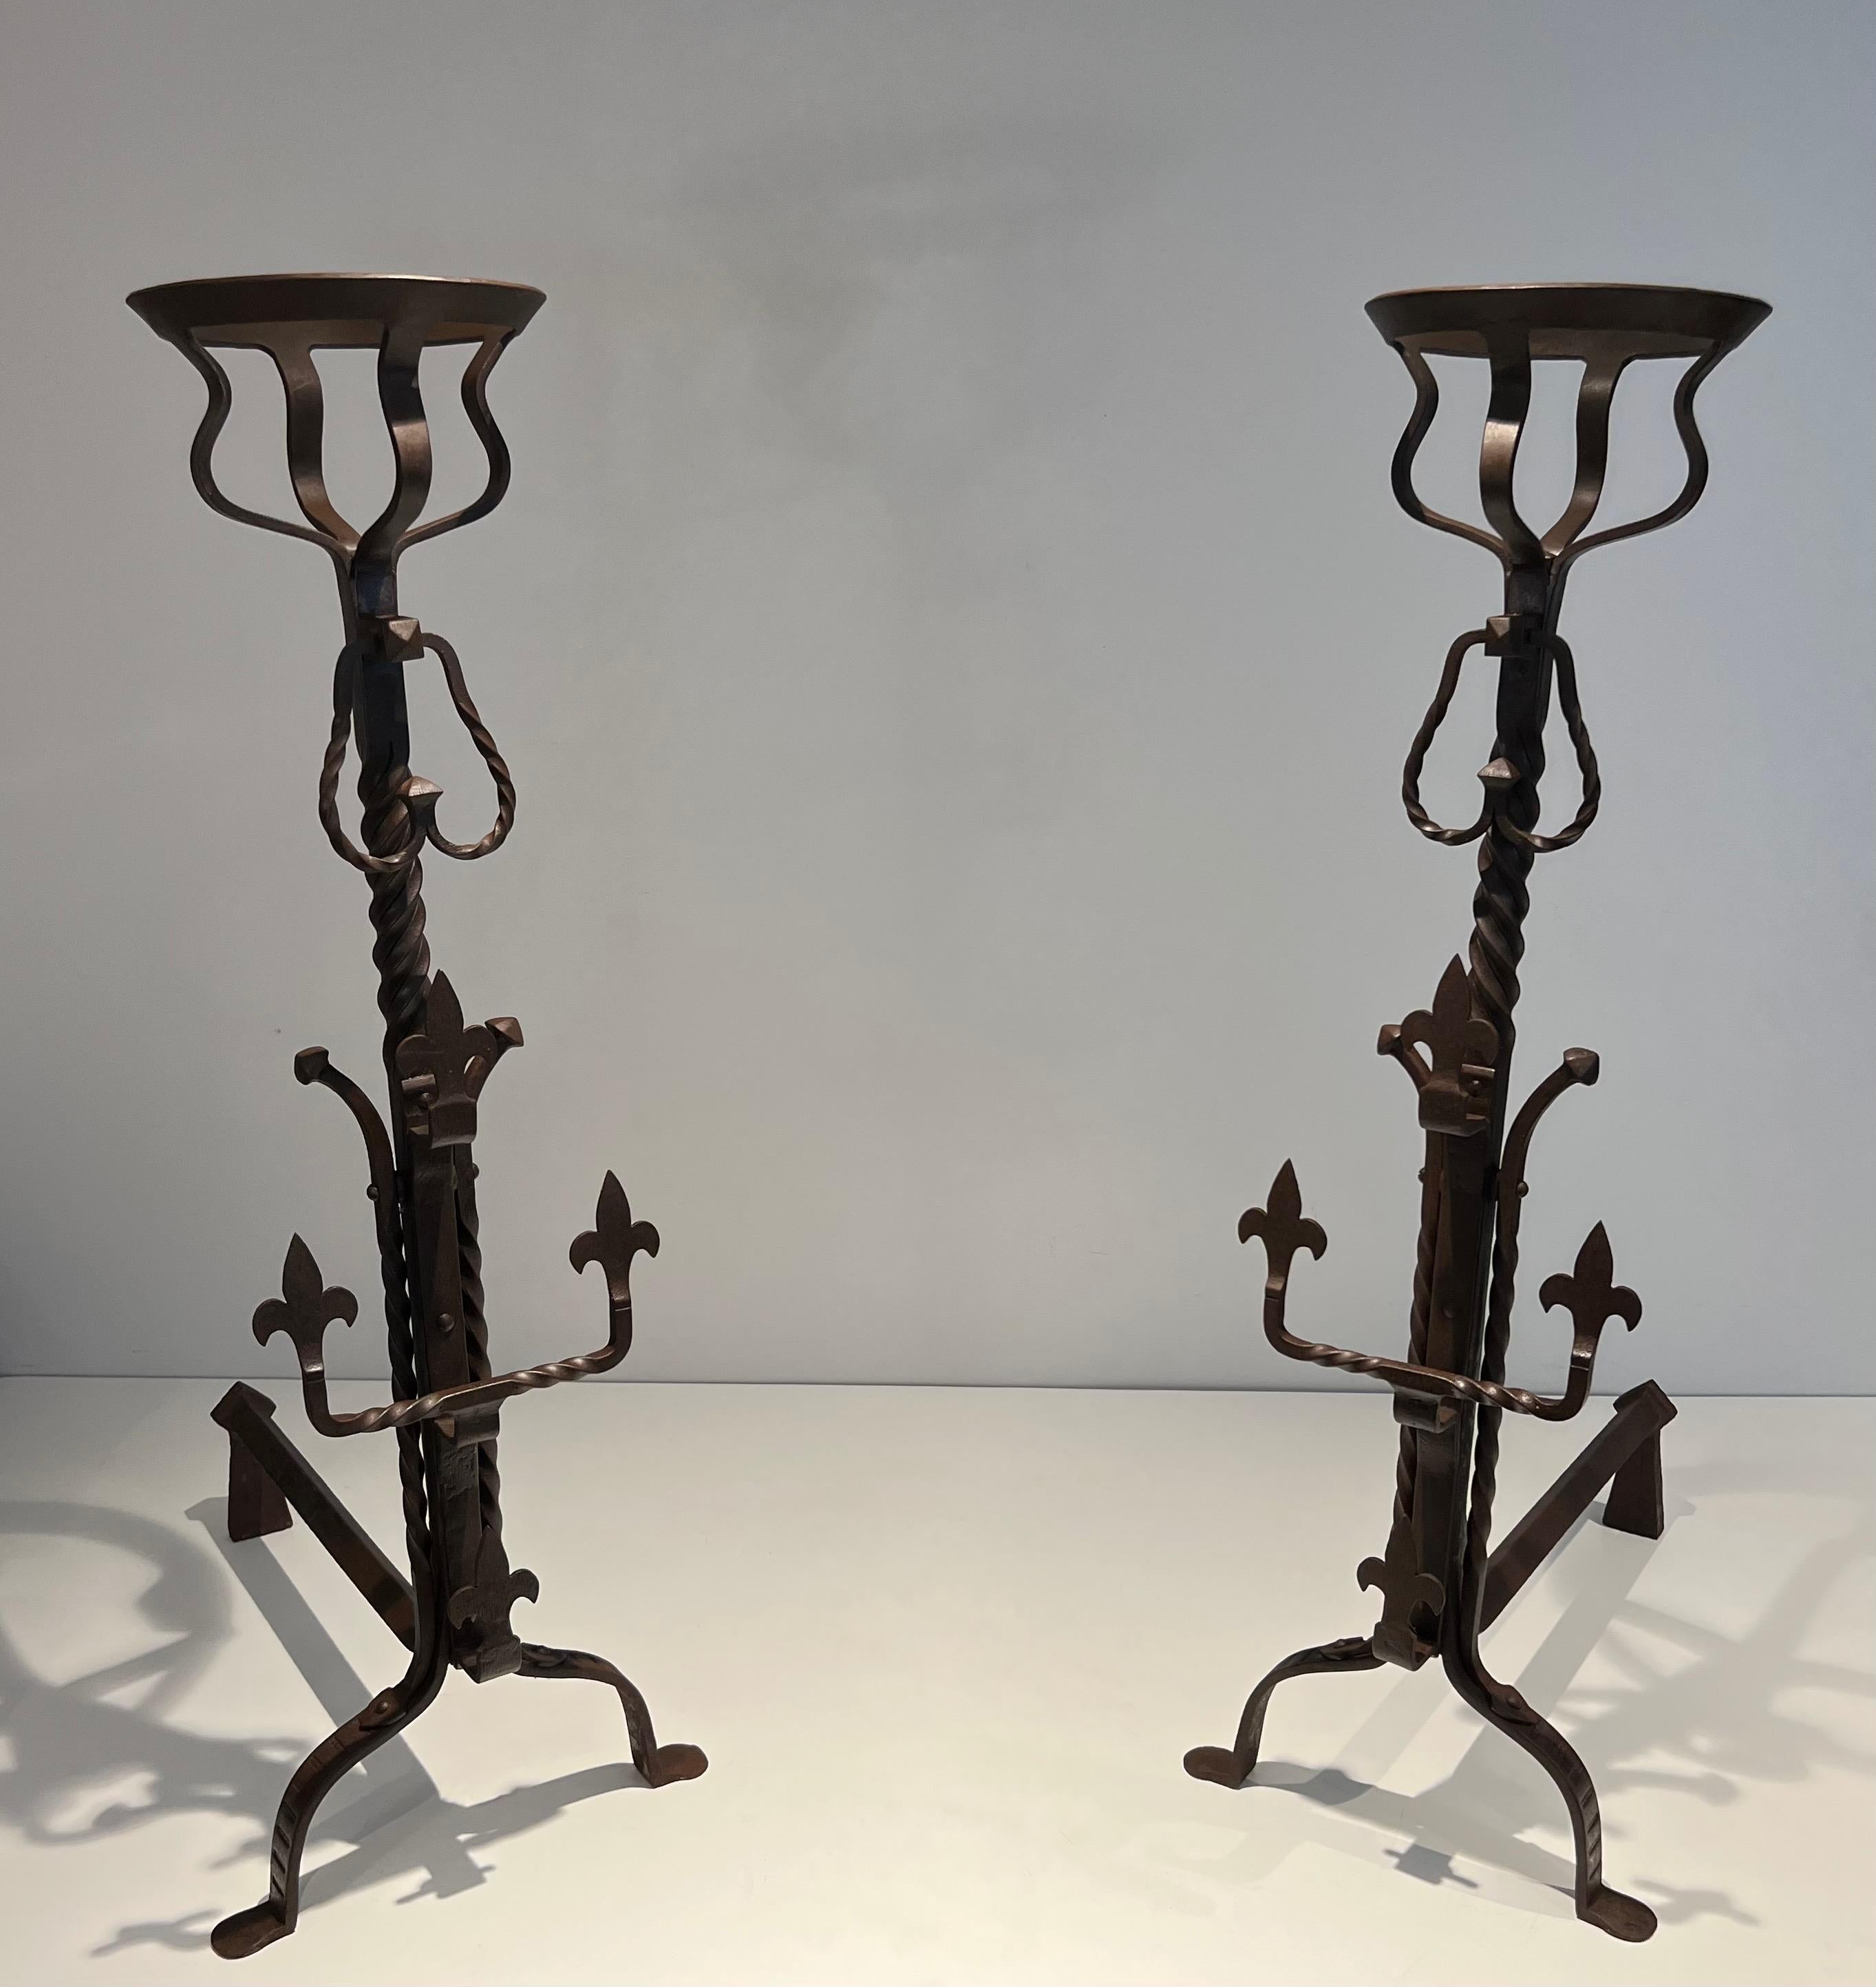 This tall pair of gothic style wrought iron andirons are also called landiers because of the shape of the top parts that where used to have water or soup boiling on receipt near the fire. They are rusty colored, have Fleurs de Lys decorations,